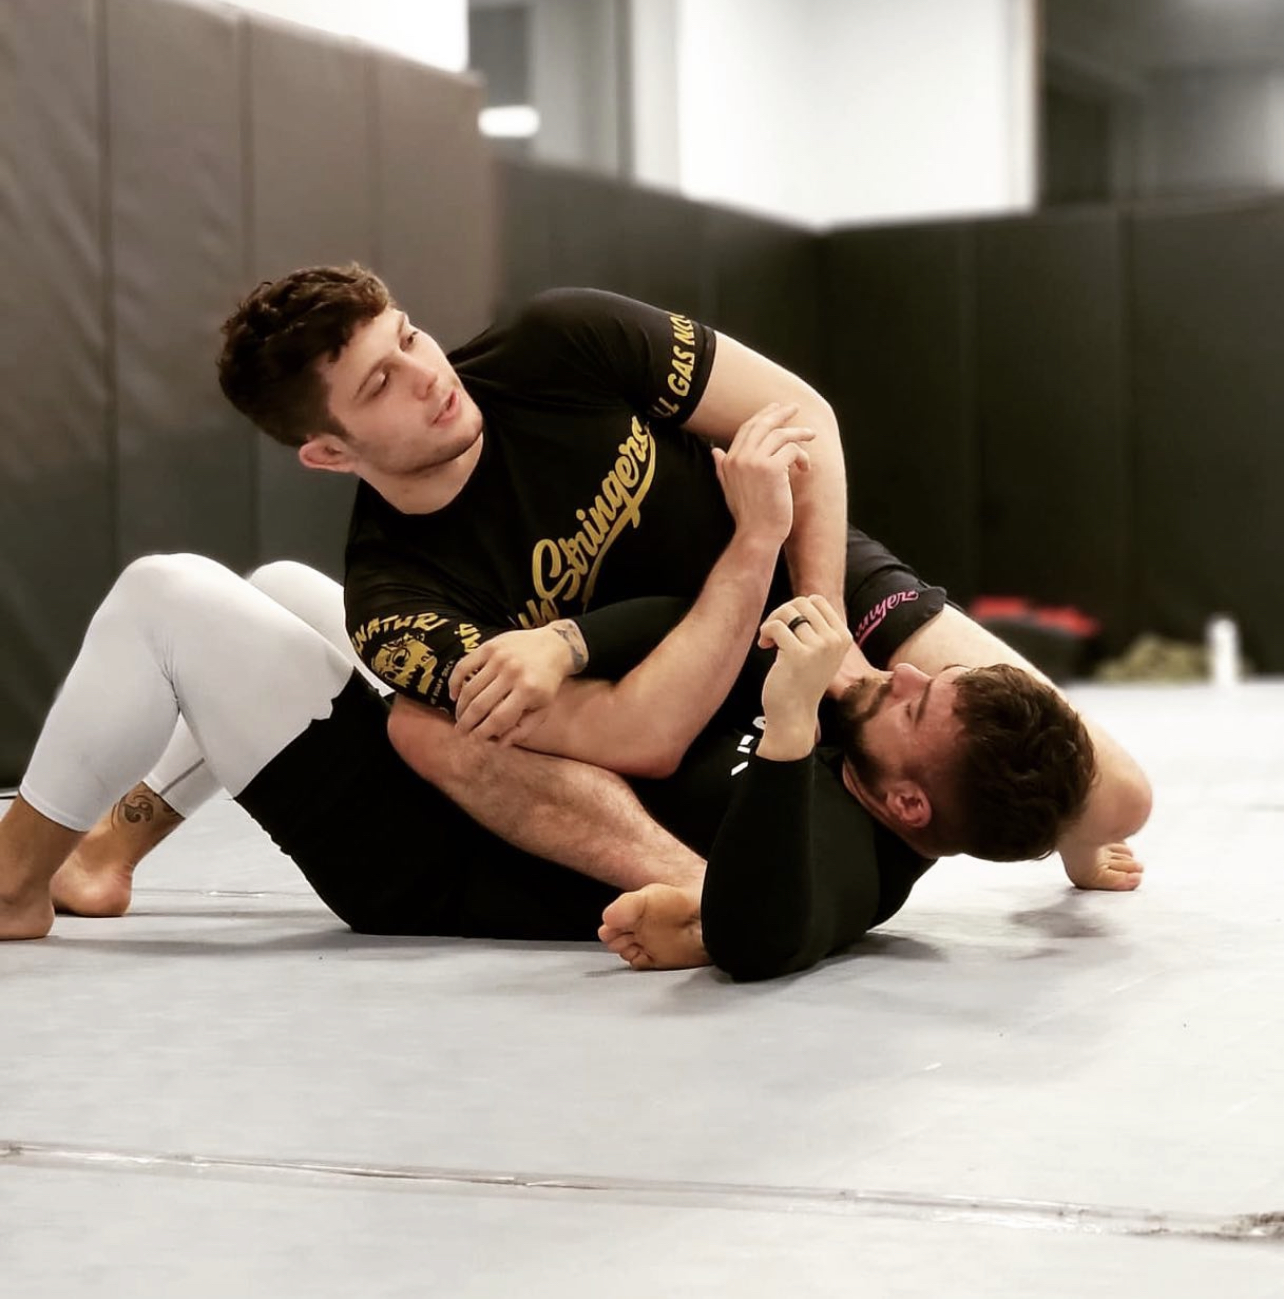 sean yadimarco defeats a jiu-jitsu partner in competition. both men are on the floor of a gym